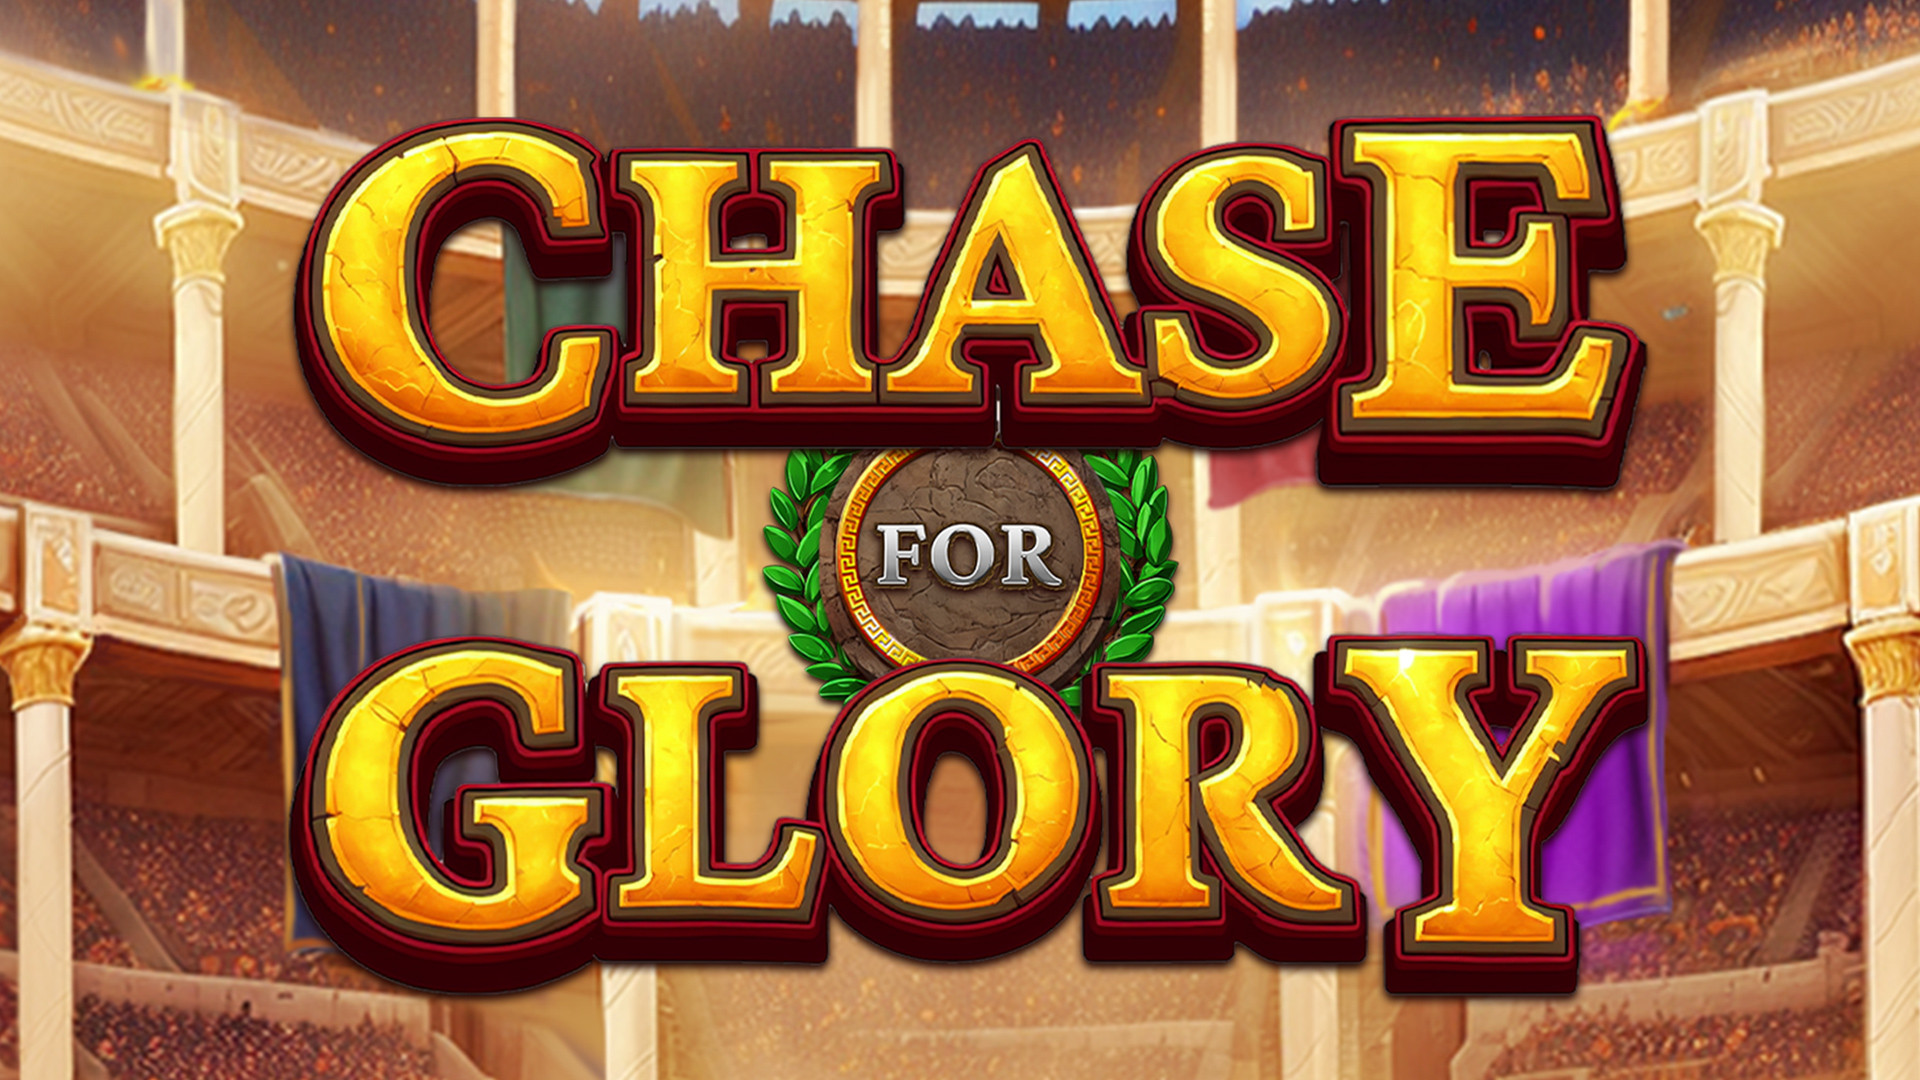 Chase for Glory